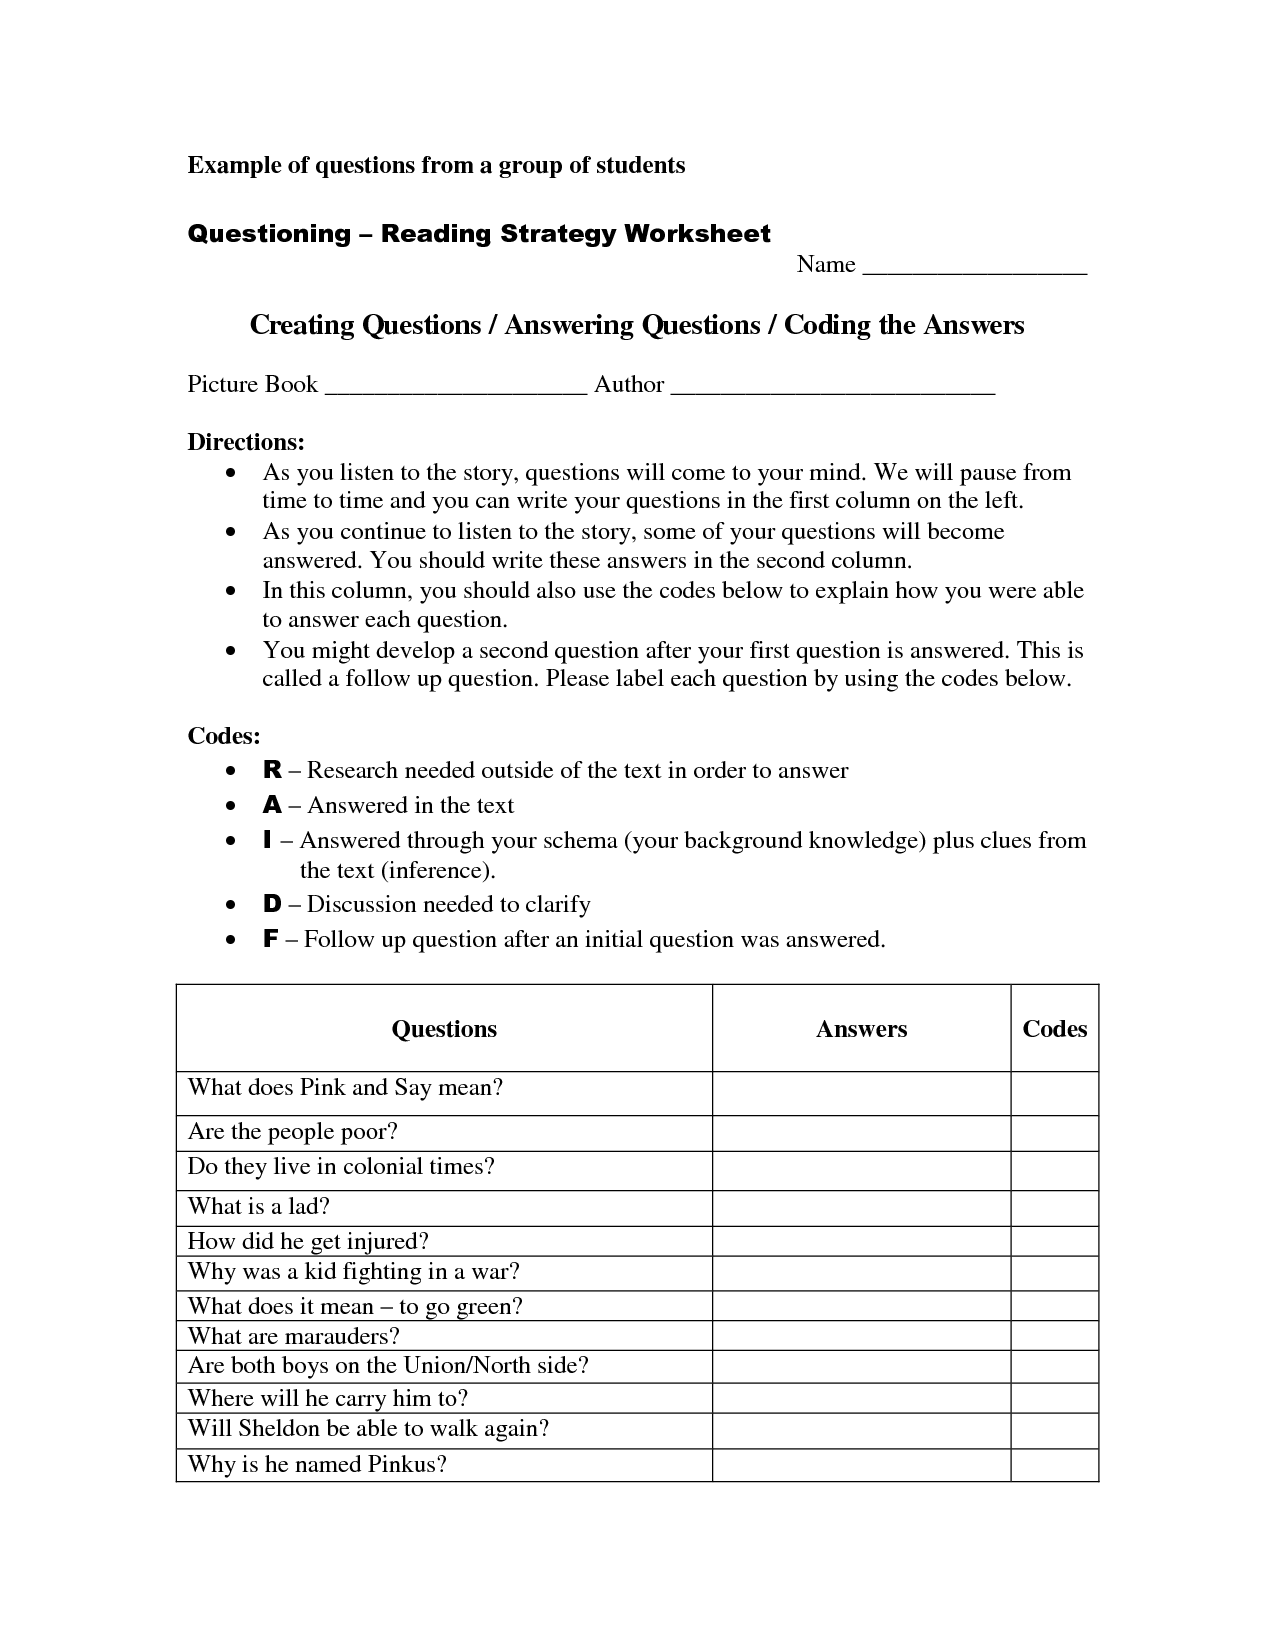 12 Best Images of Active Reading Strategies Worksheet - Active Reading